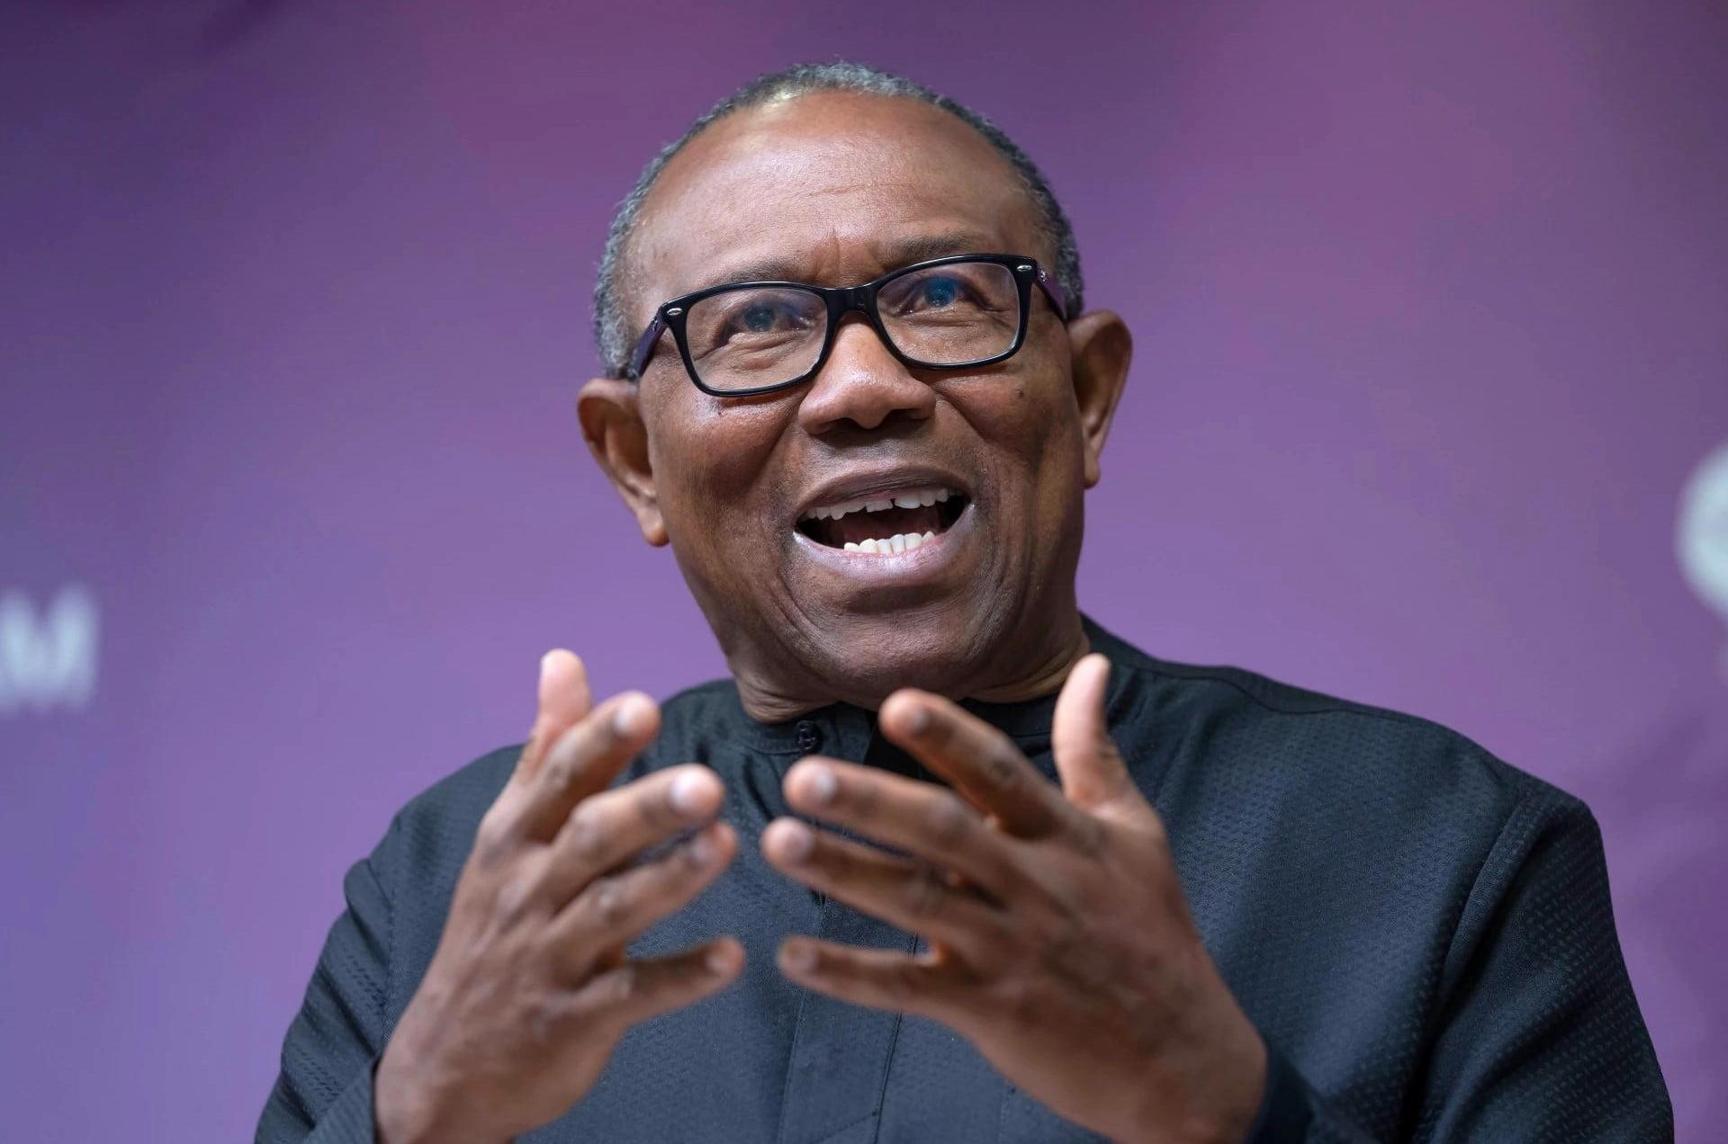 Evil plans being hatched against me, supporters – Peter Obi raises alarm